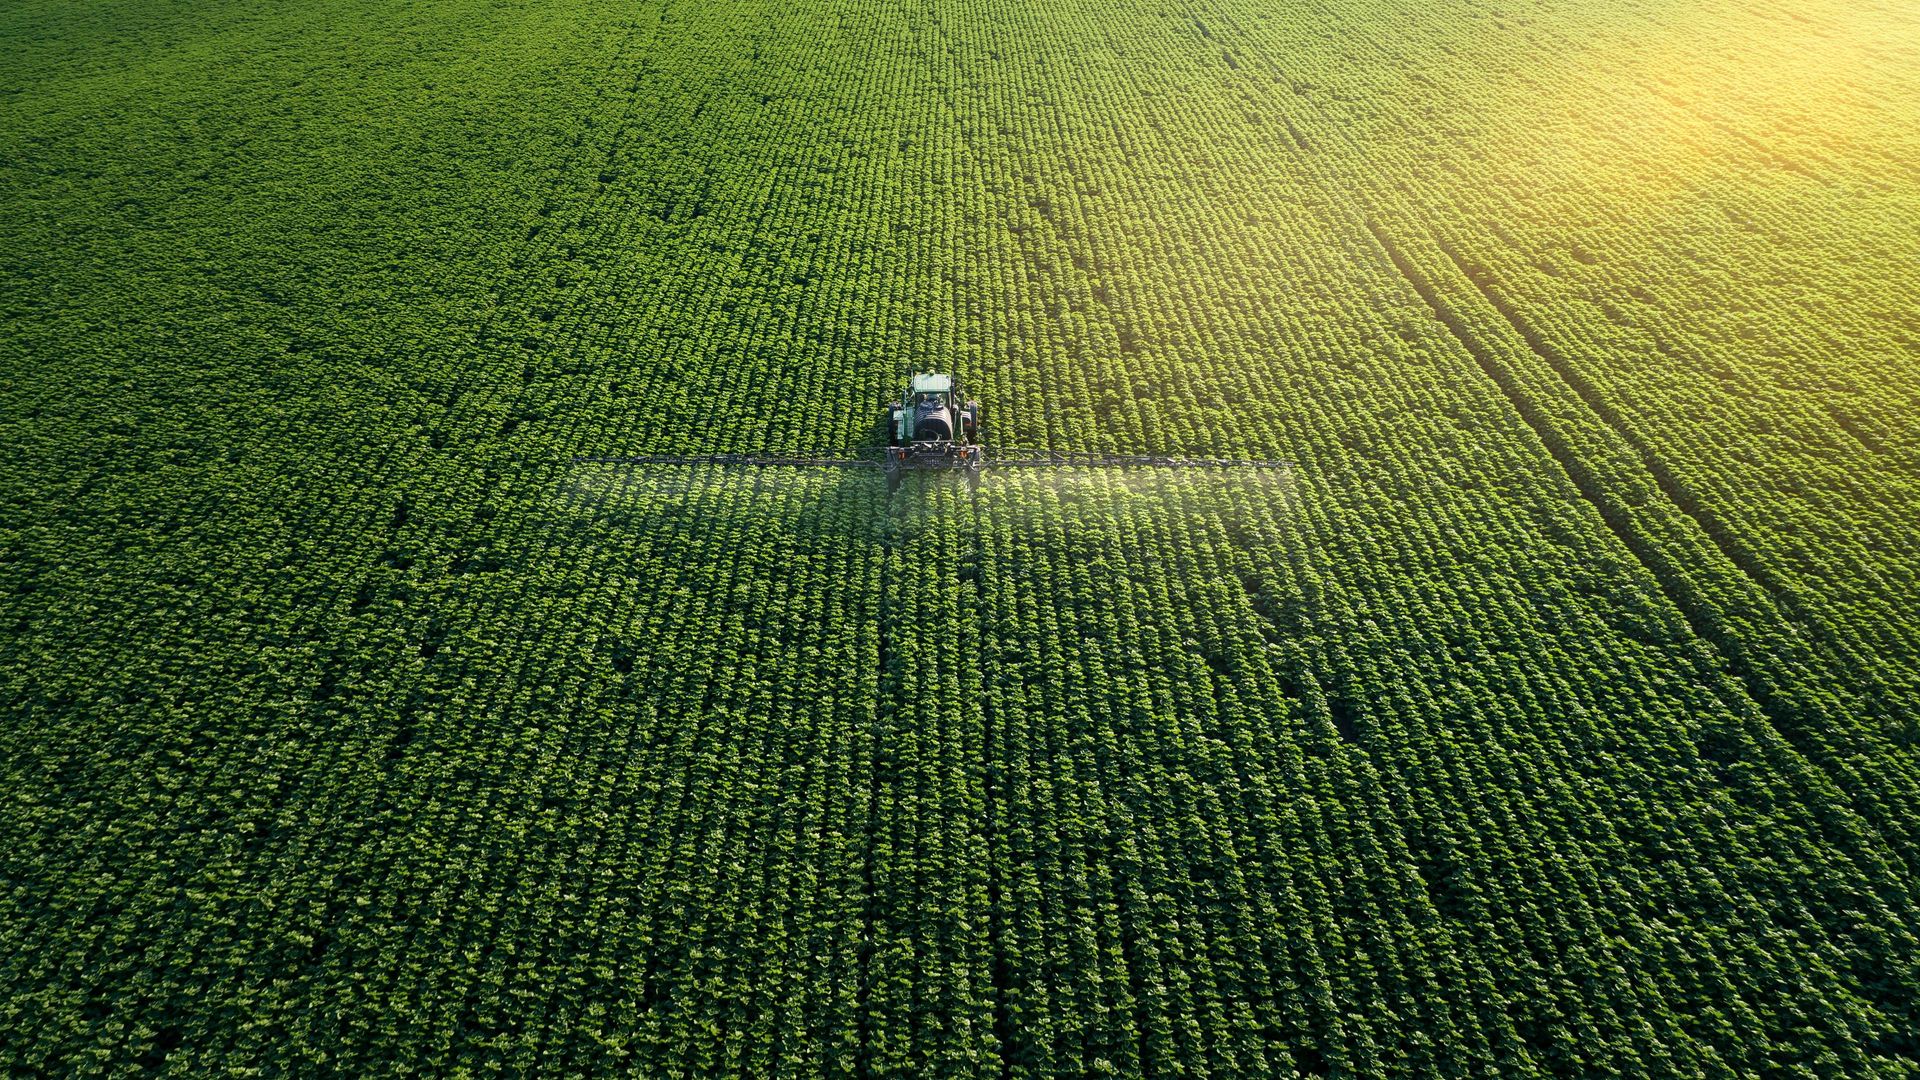 Image of a tractor applying a plant protection product to a field 